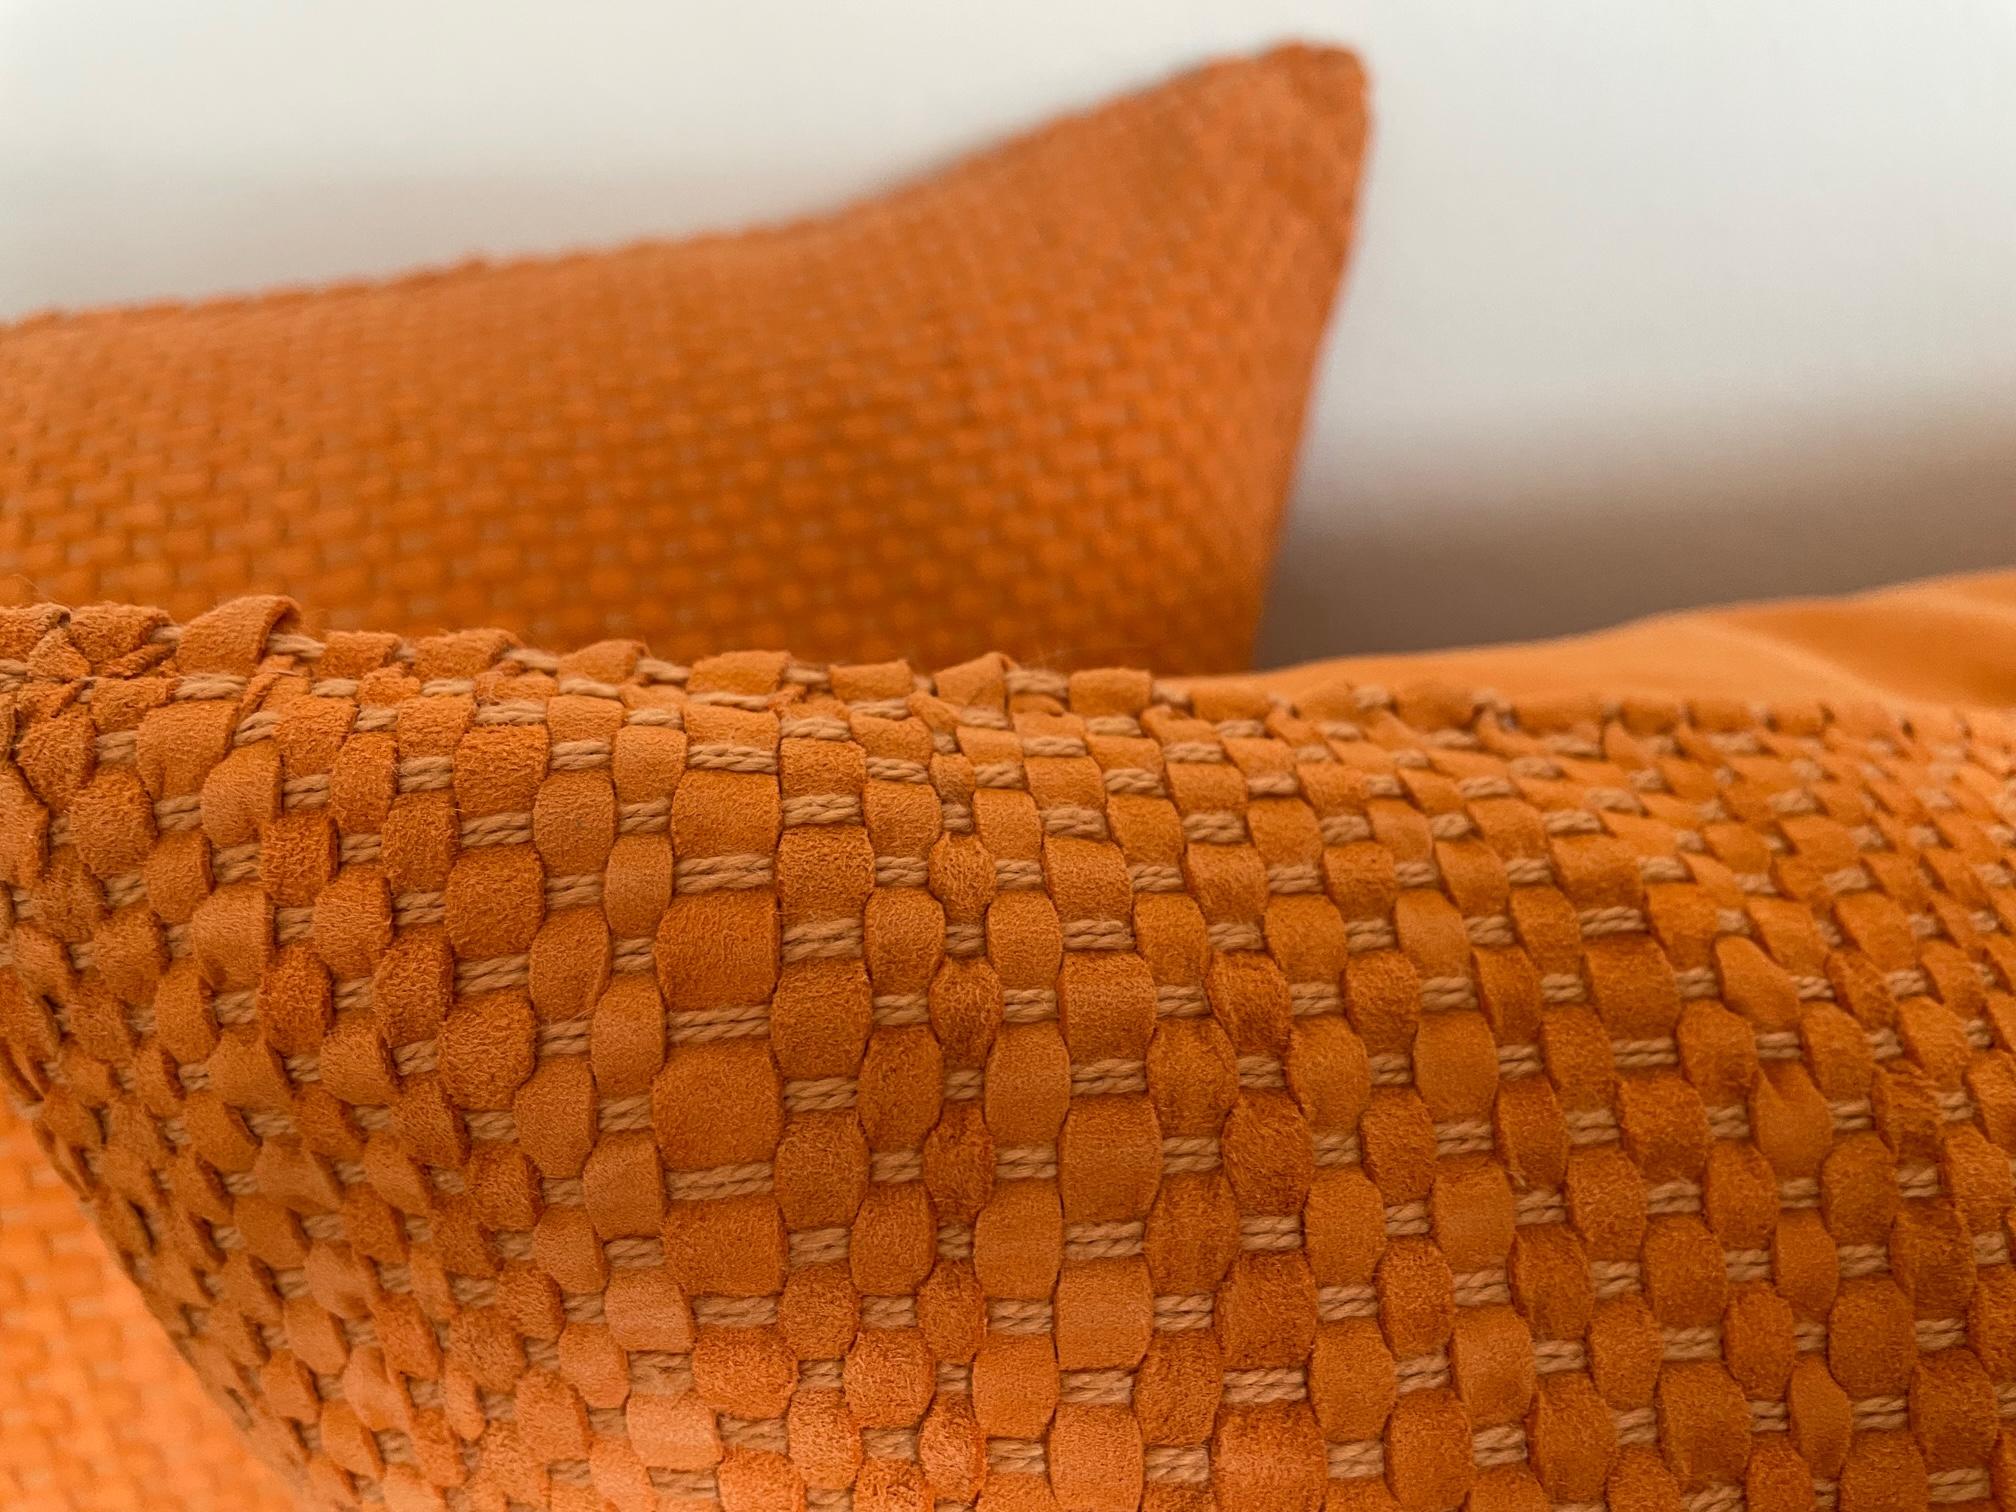 This hand woven Suede cushions colour Mandarine will bring colour to your interior. The cushions are hand crafted in Germany with suede leather from Italy dyed to our colour specification.
The back side panel of the cushions is coming as well in the